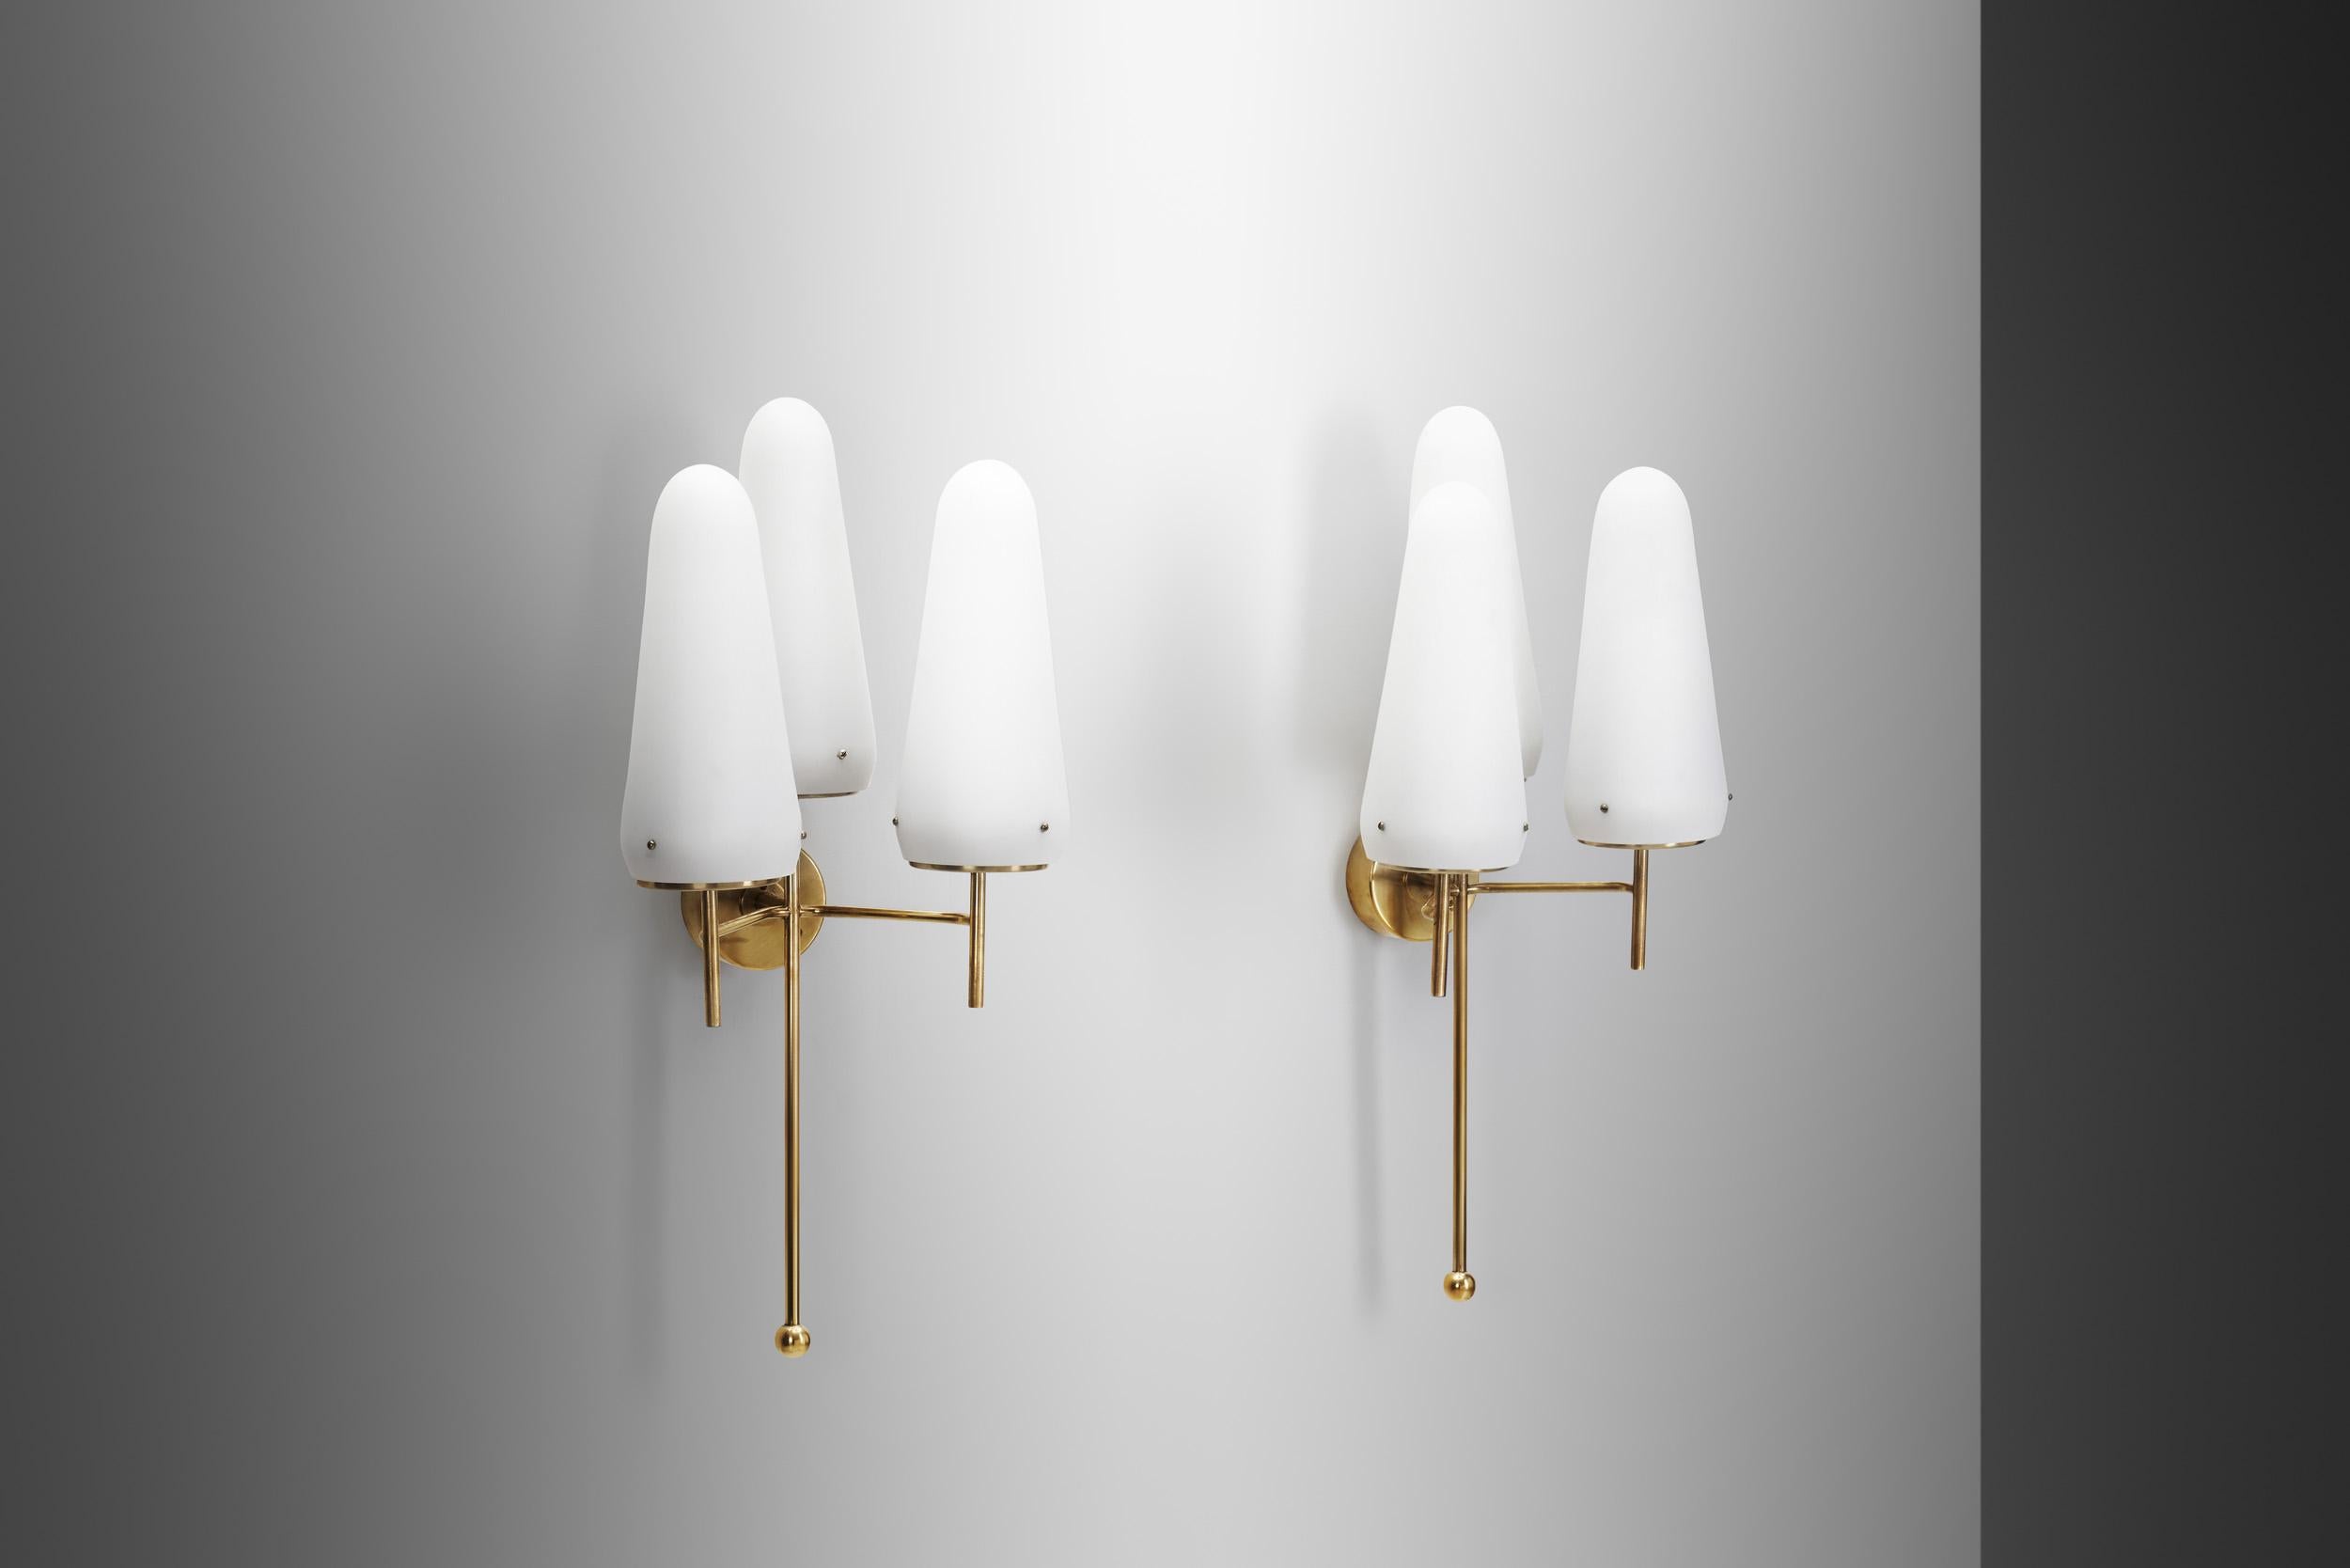 Mid-Century Modern Hans Agne Jakobsson Brass and Glass Wall Sconces for AB Markaryd, Sweden 1950s For Sale